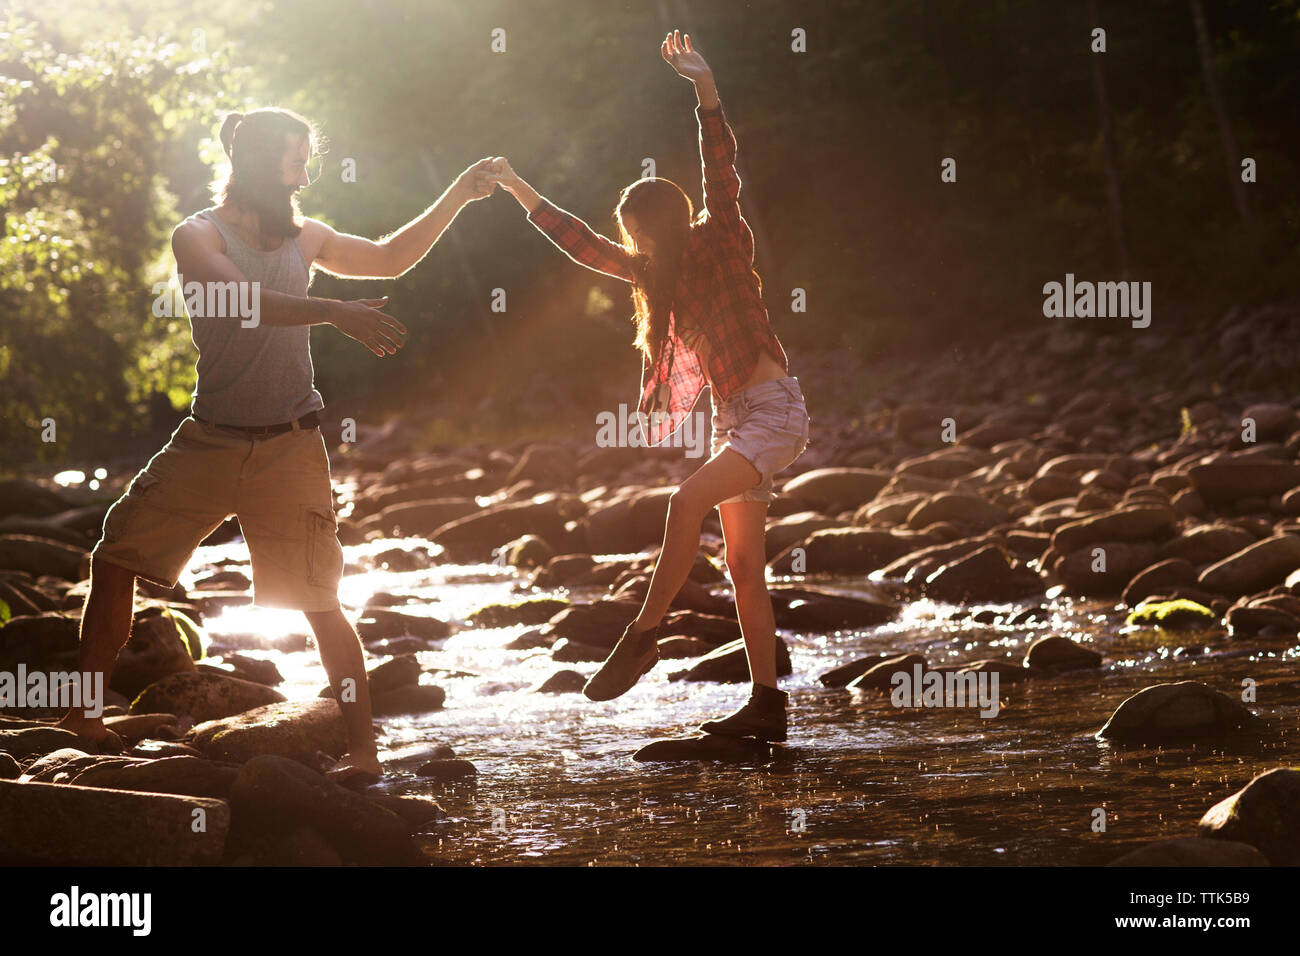 Boyfriend holding girlfriend while crossing stream in forest Stock Photo